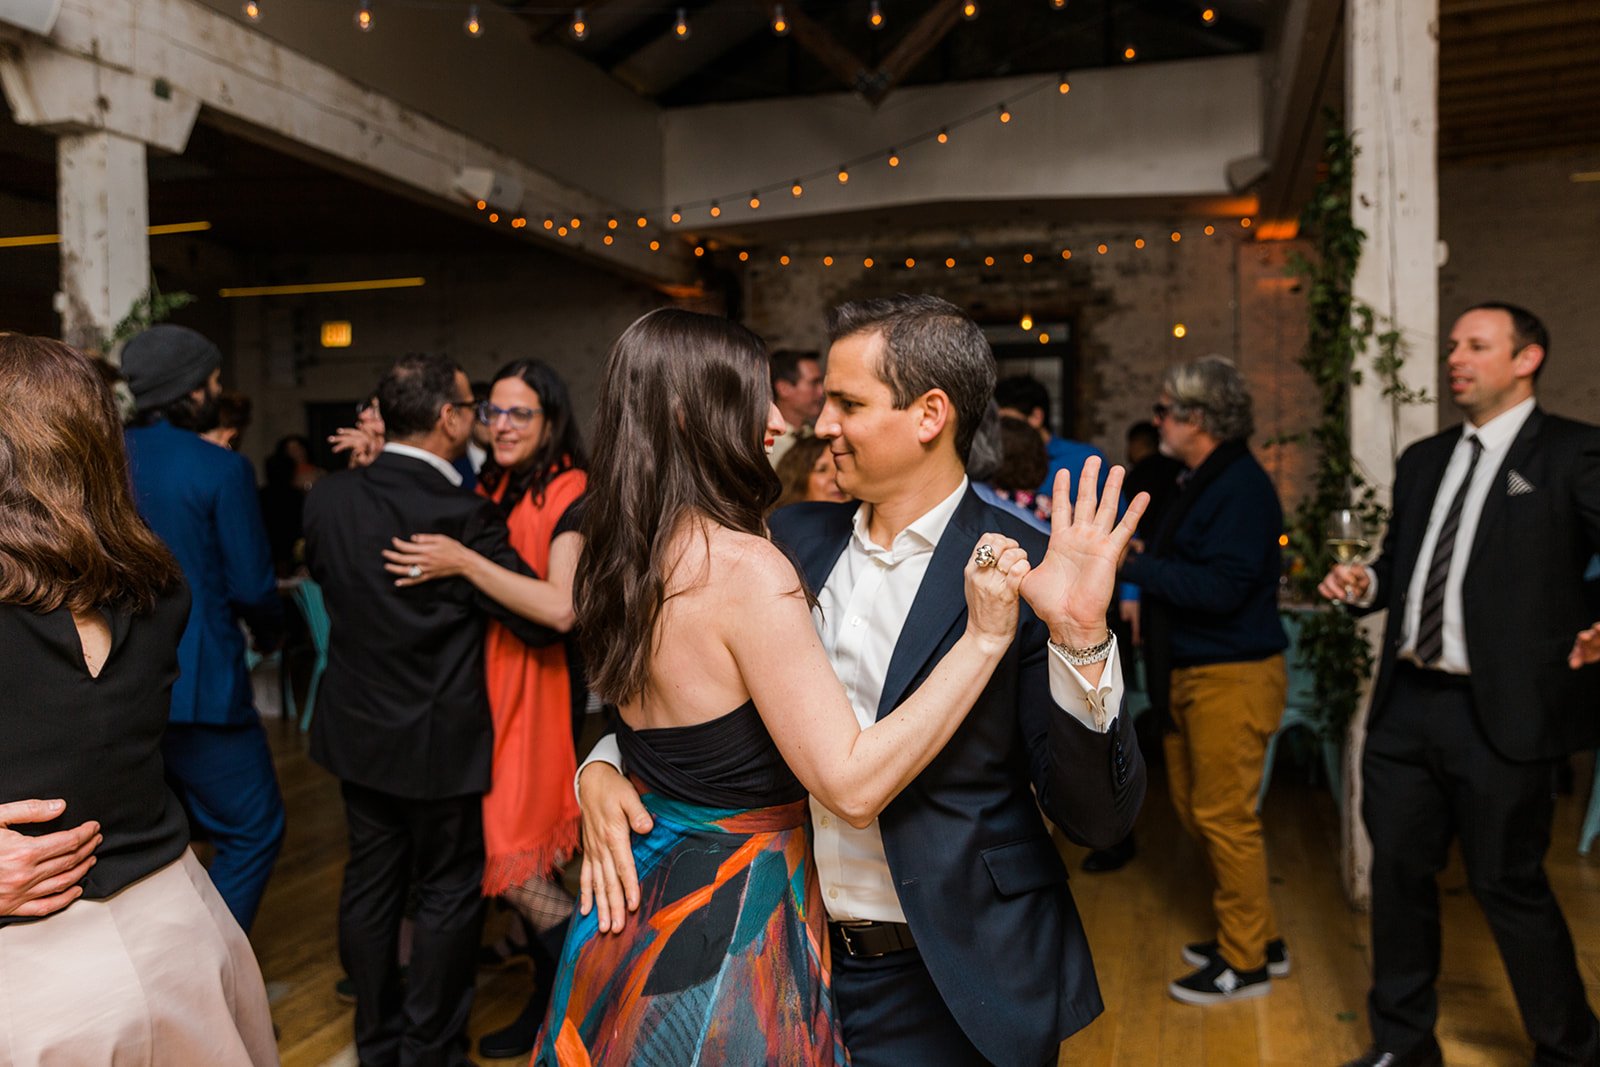  Documentary candid photo of guests dancing at nontraditional Jewish and Venezuelan wedding reception at The Joinery Chicago an Industrial loft wedding venue In Logan Square.  